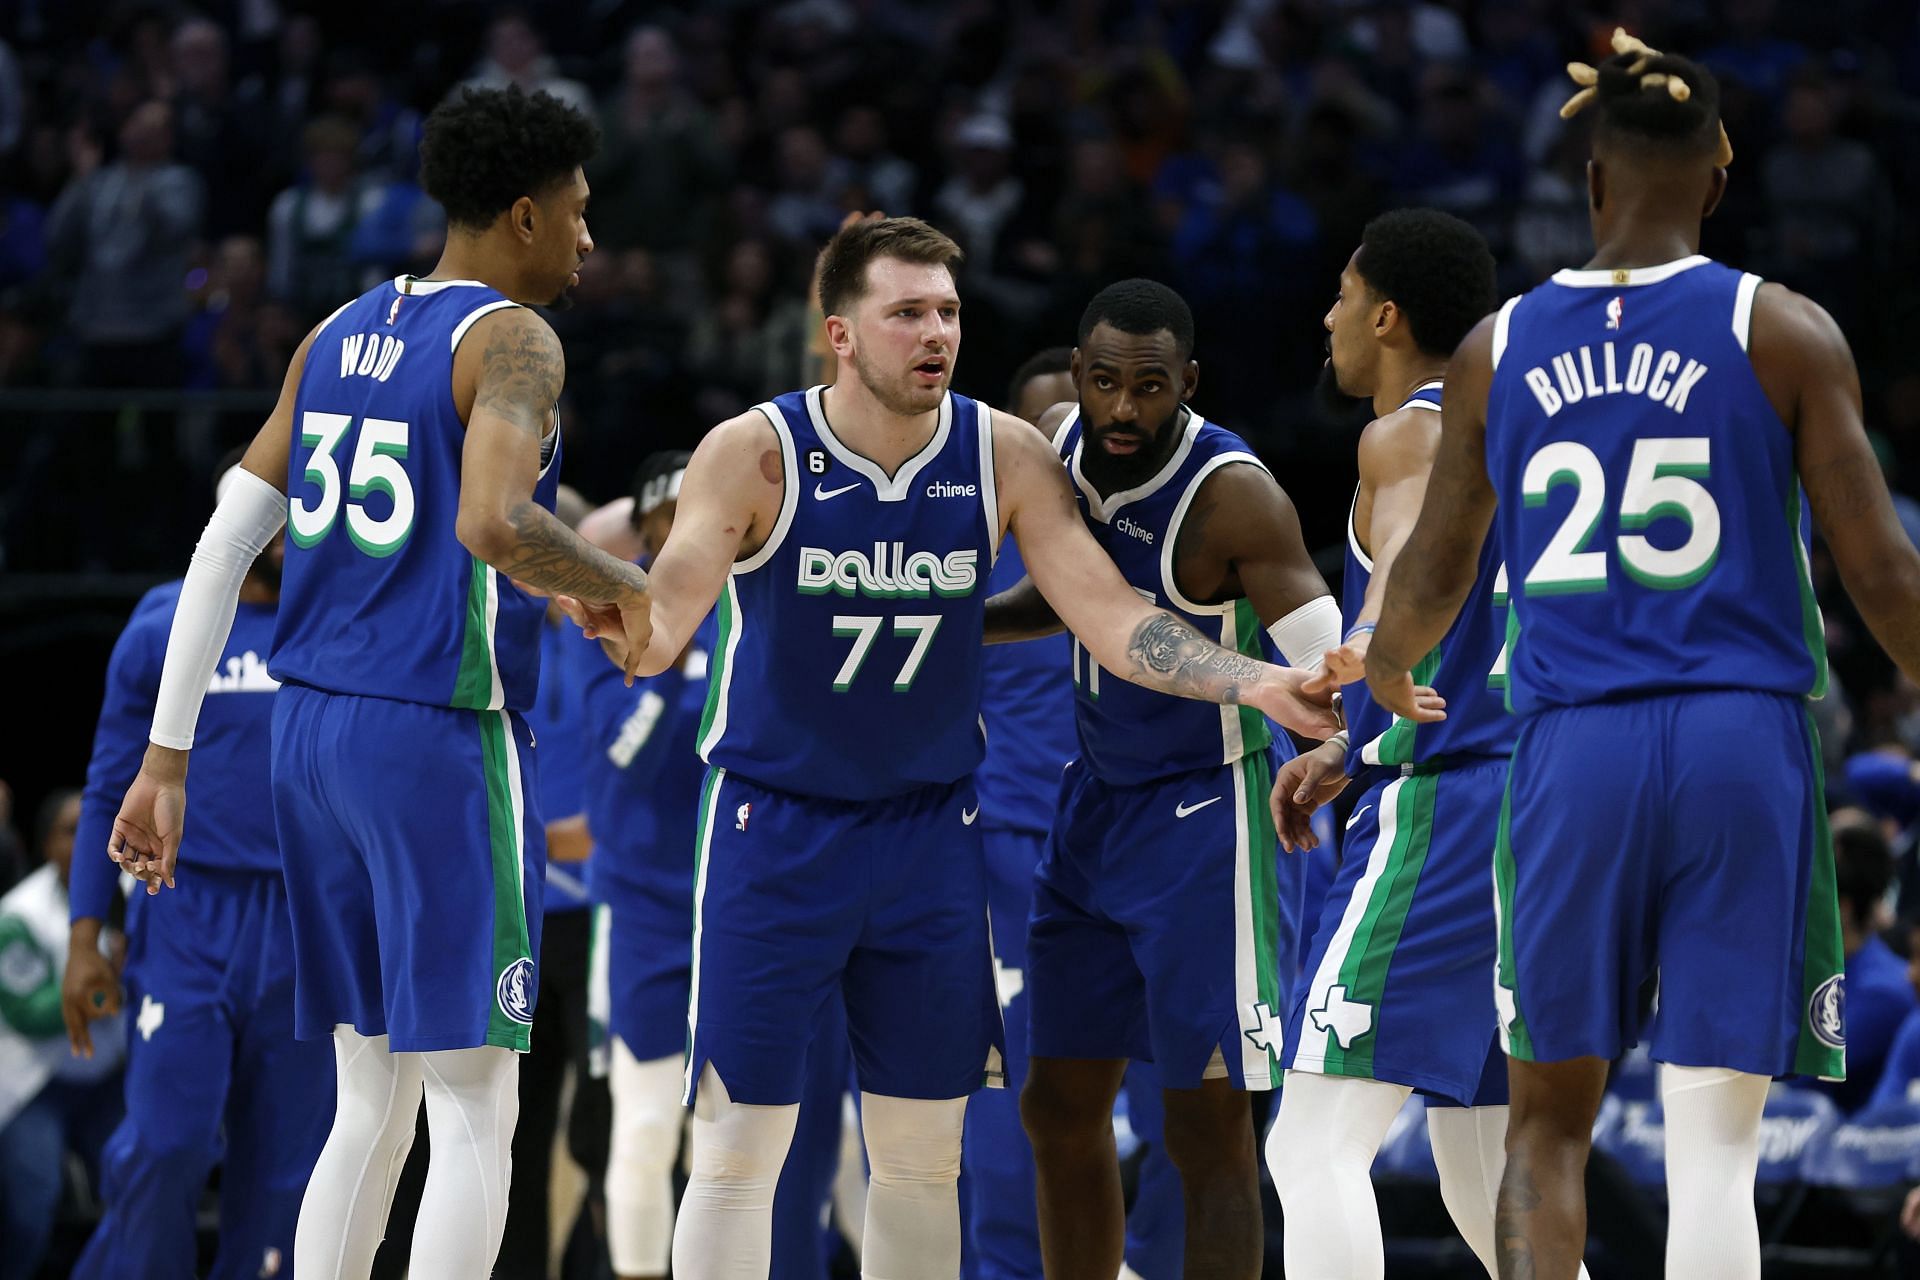 Luka Doncic could drag the Dallas Mavericks to the playoffs and win his first MVP award.